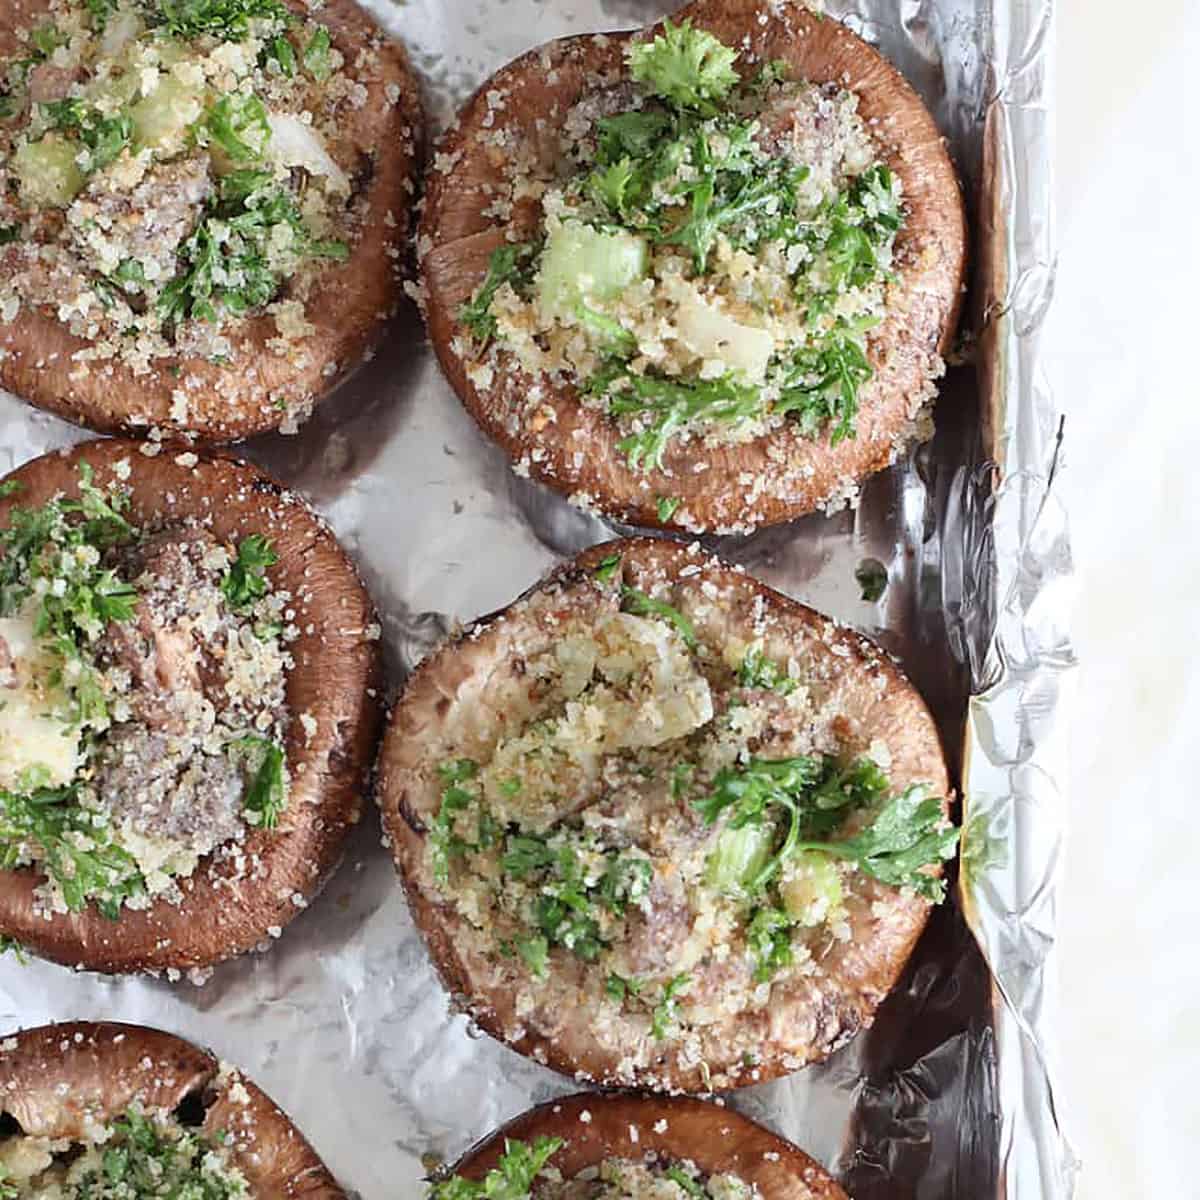 stuffed mushrooms in a pan ready to cook.